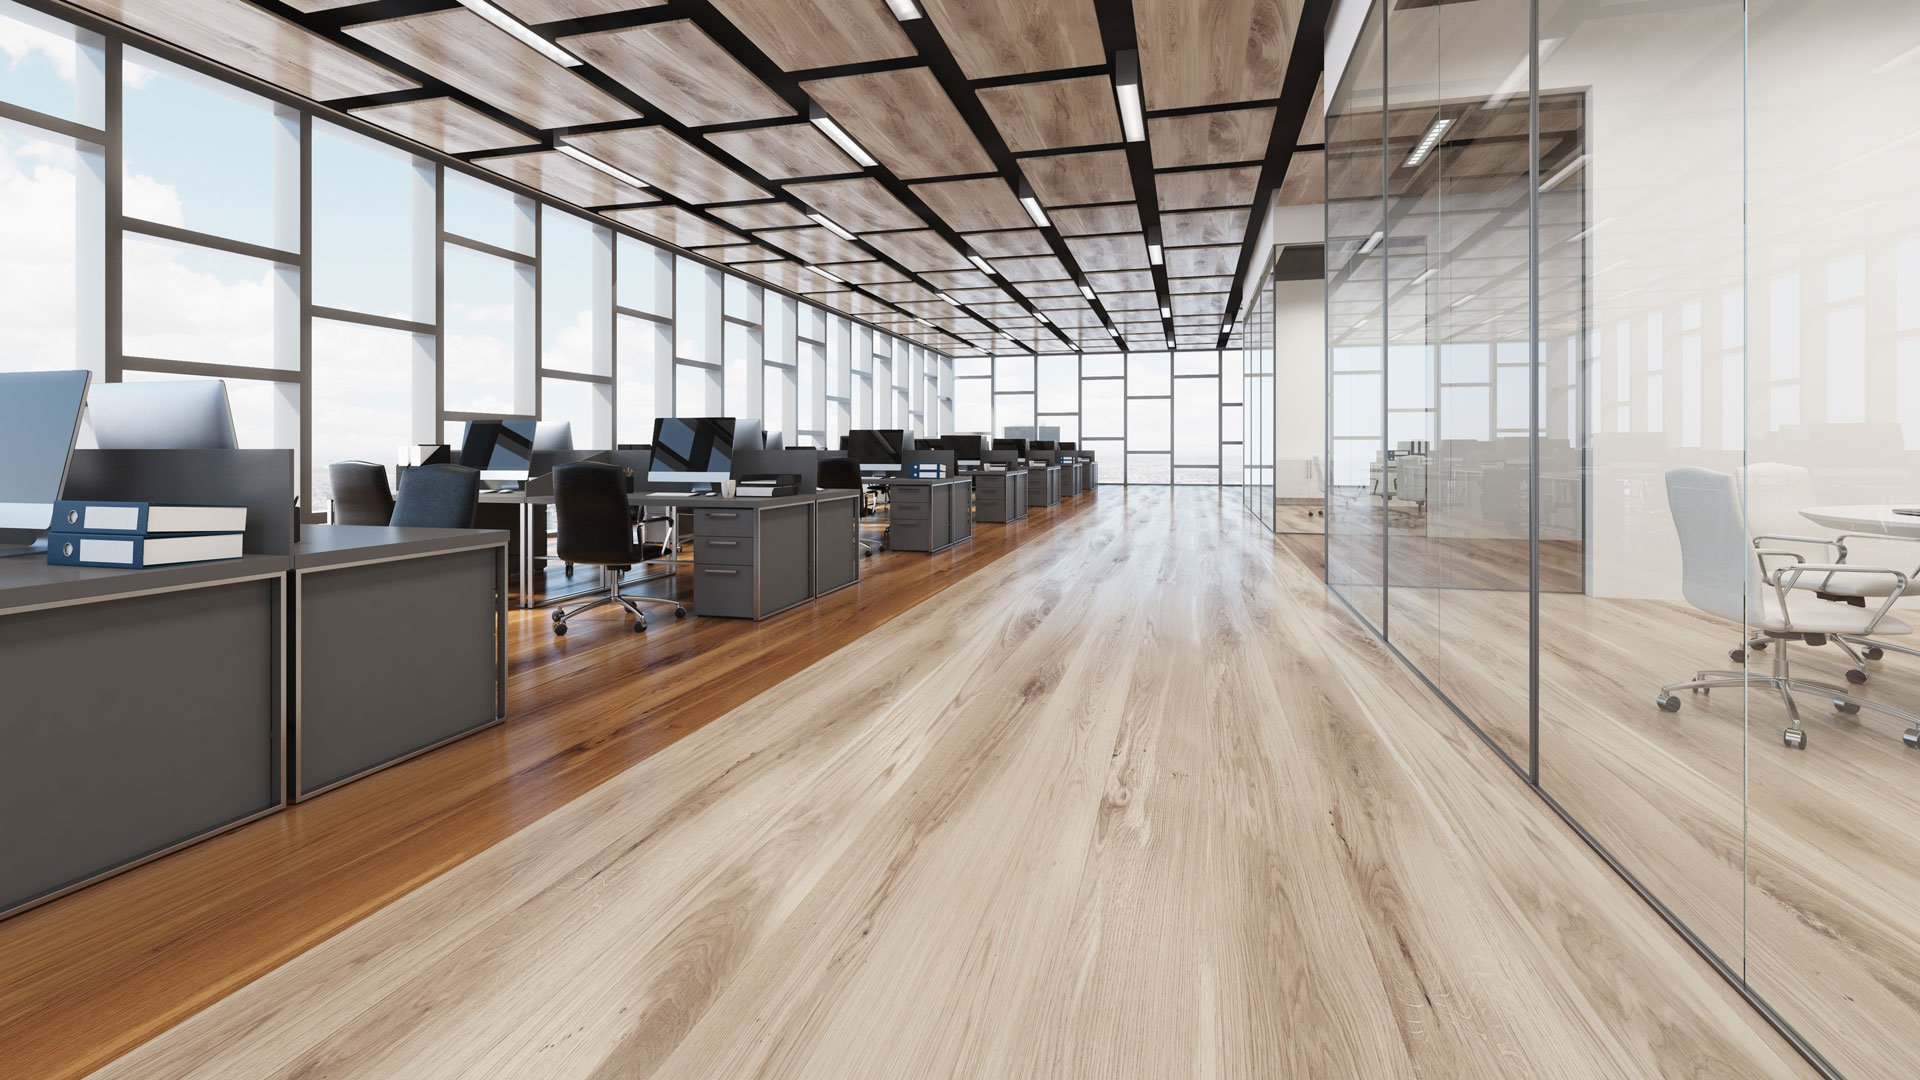 Floors and More AR carries high-performance commercial flooring products